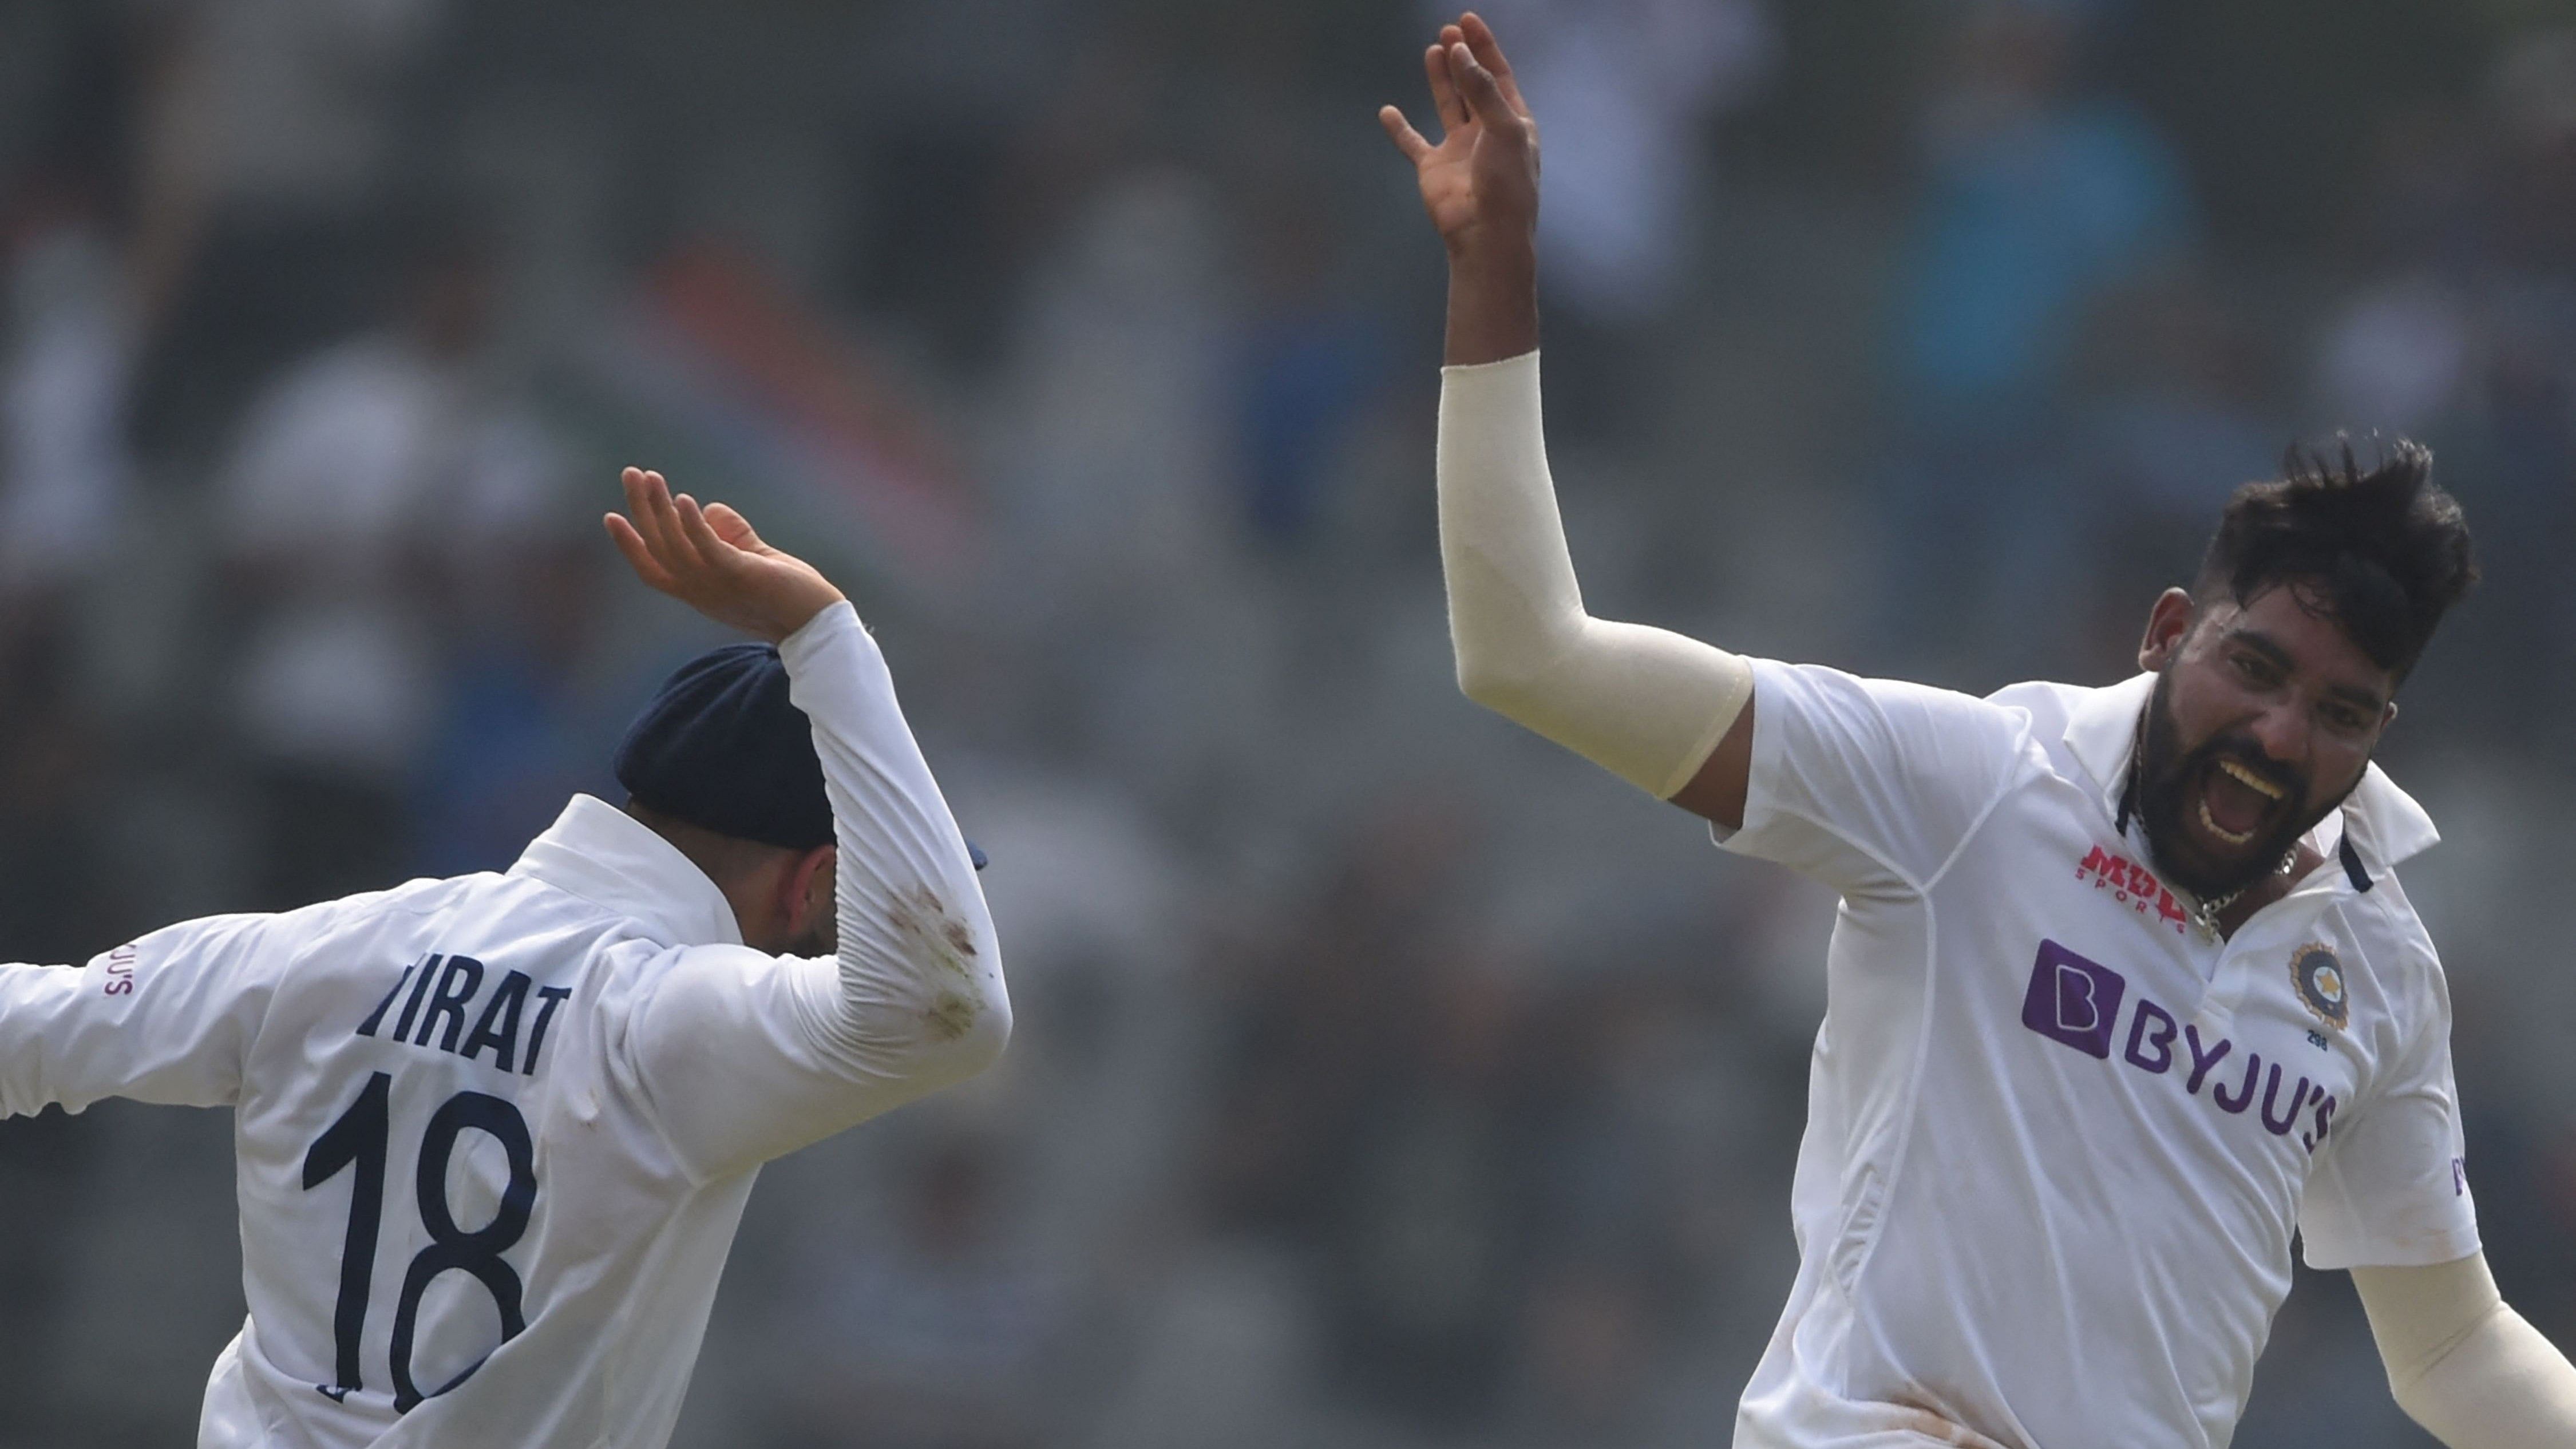 Mohammed Siraj (R) celebrates after the dismissal of New Zealand's captain Tom Latham. Credit: AFP Photo